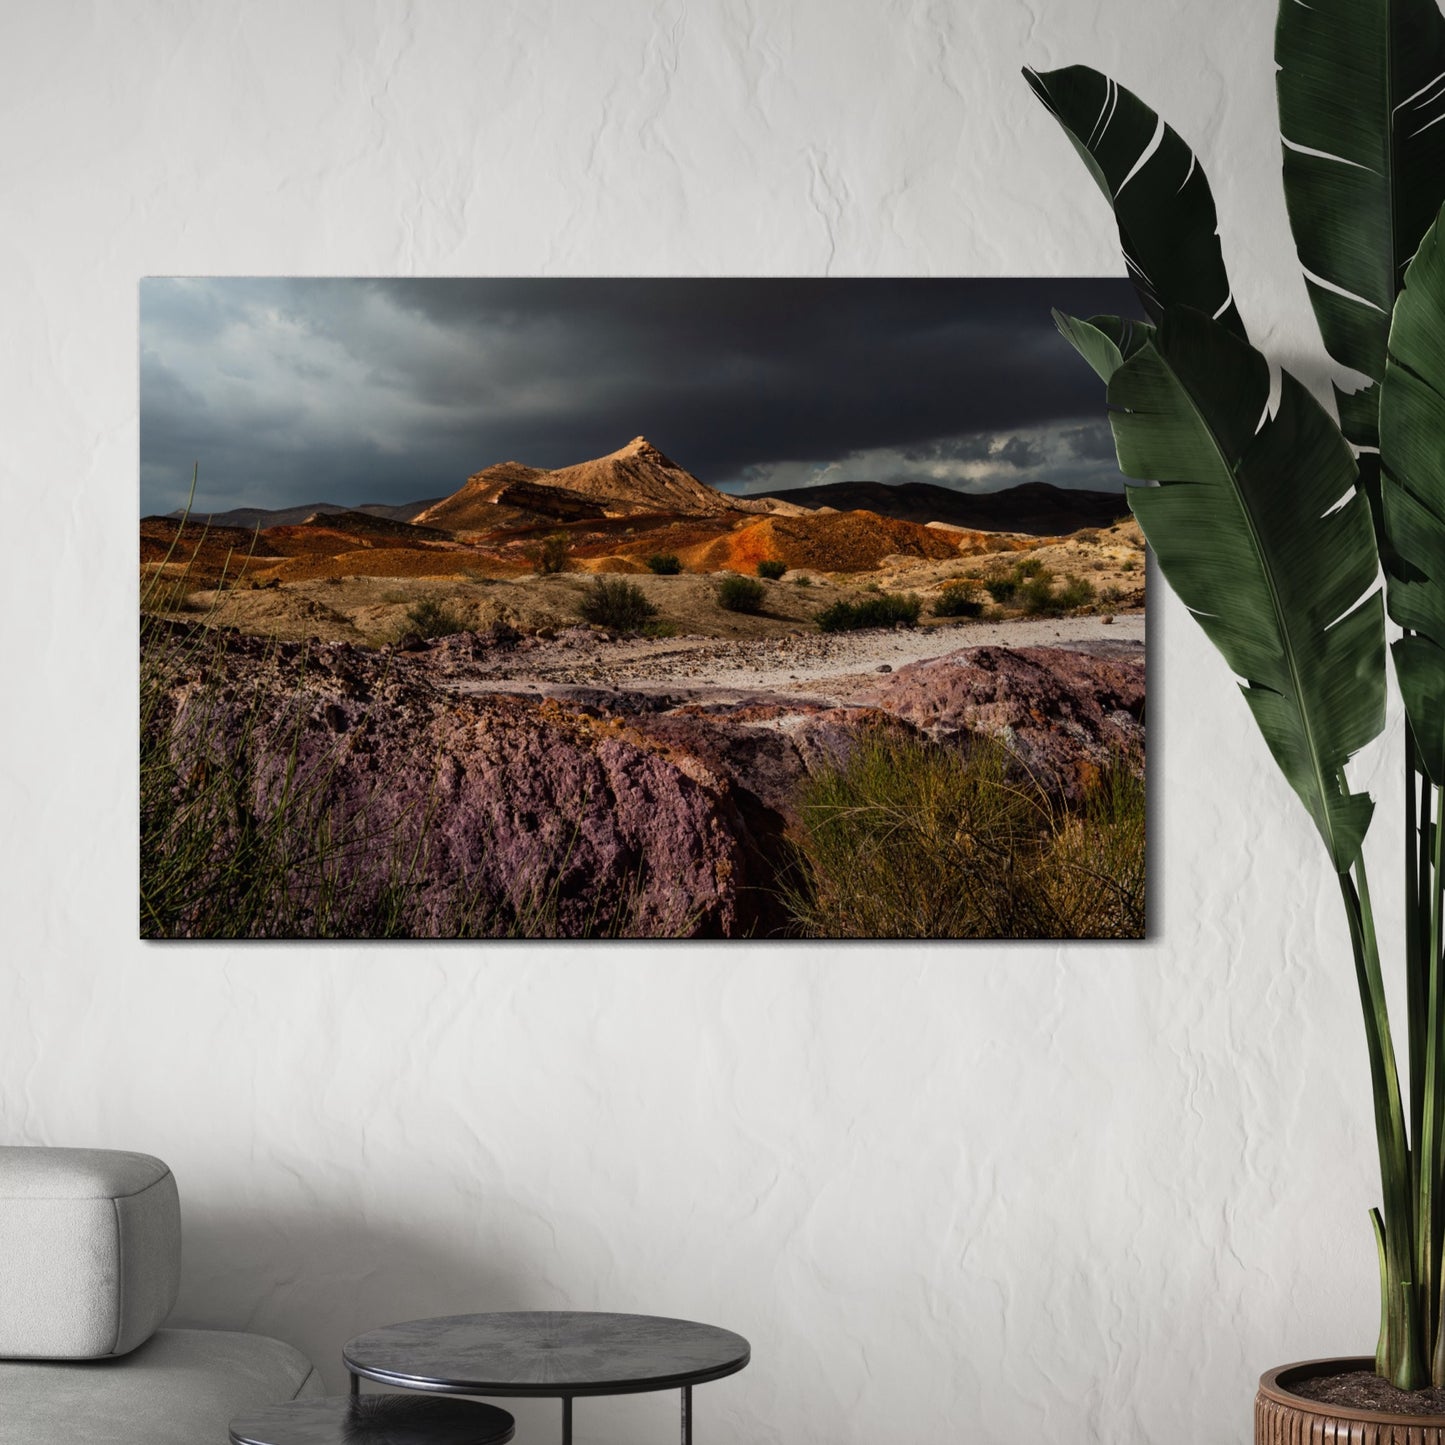 Desert Dreams by Yehoshua Halevi Photograph - Glossy Acrylic Print (French Cleat Hanging)